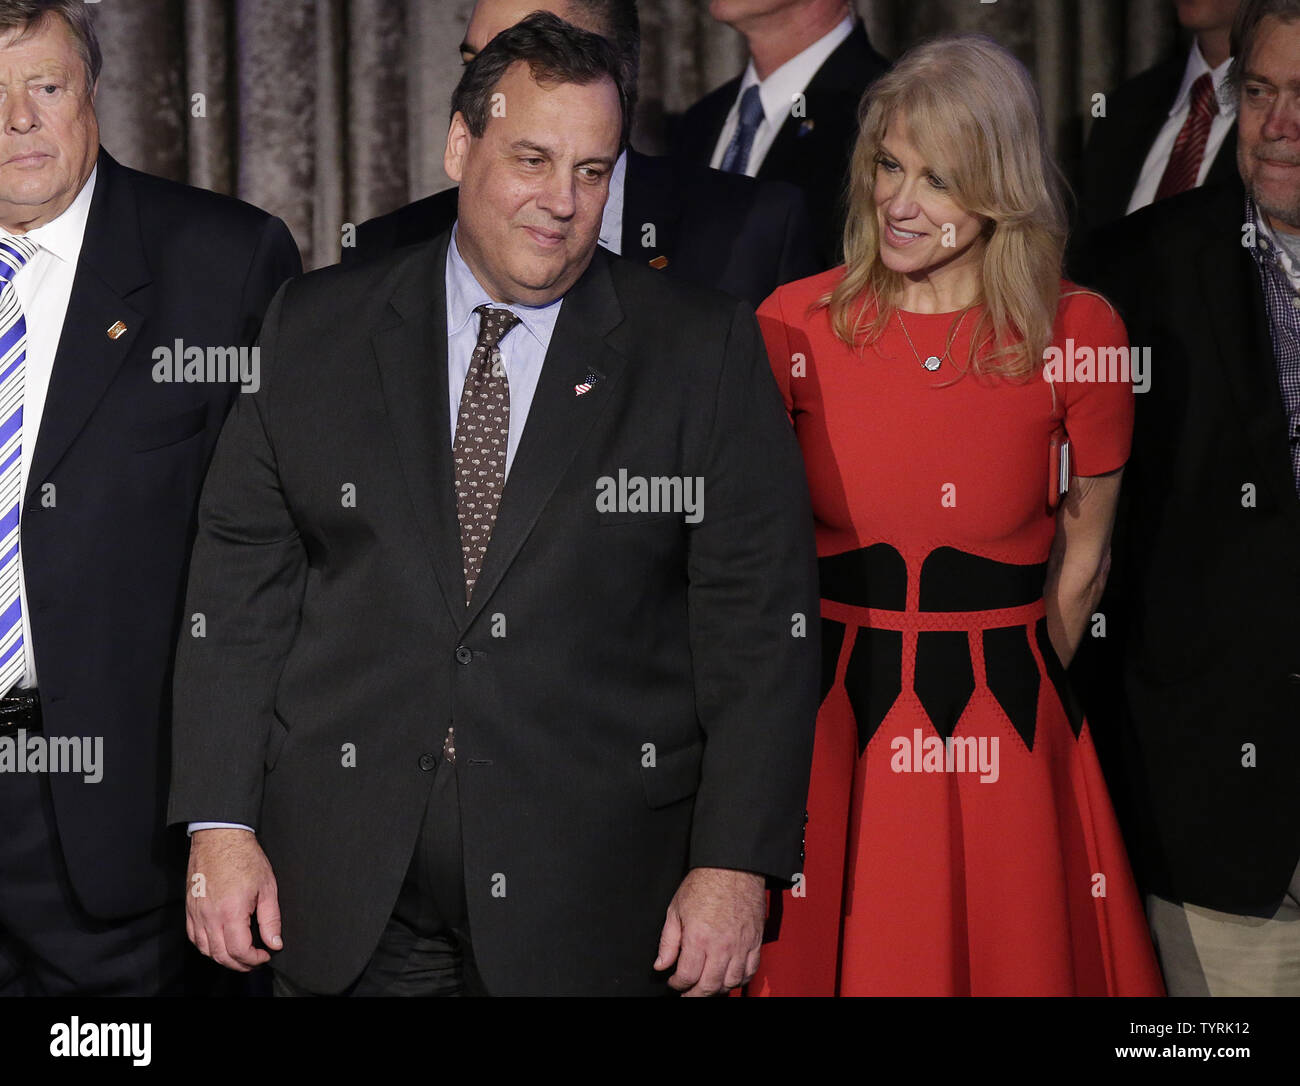 New Jersey Governor Chris Christy stands with President-elect of the United States Donald Trump's campaign manager Kellyanne Conway as Trump makes his acceptance speech at the New York Hilton Midtown on November 8, 2016 in New York City. Trump stunned the political world by defeating Hillary Clinton.    Photo by John Angelillo/UPI Stock Photo